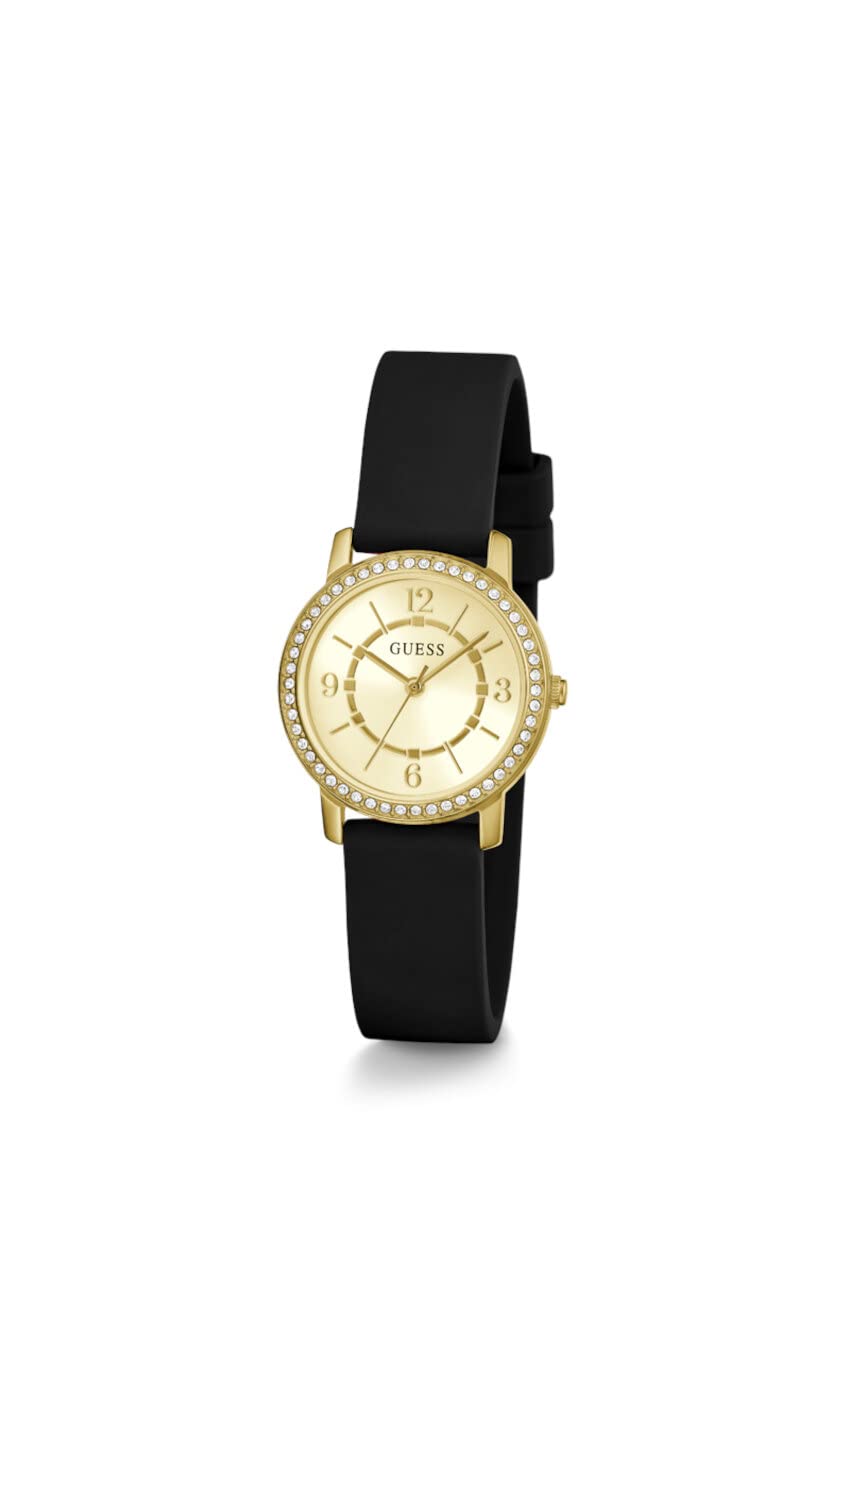 GUESS Ladies 28mm Watch - Black Strap Champagne Dial Gold Tone Case